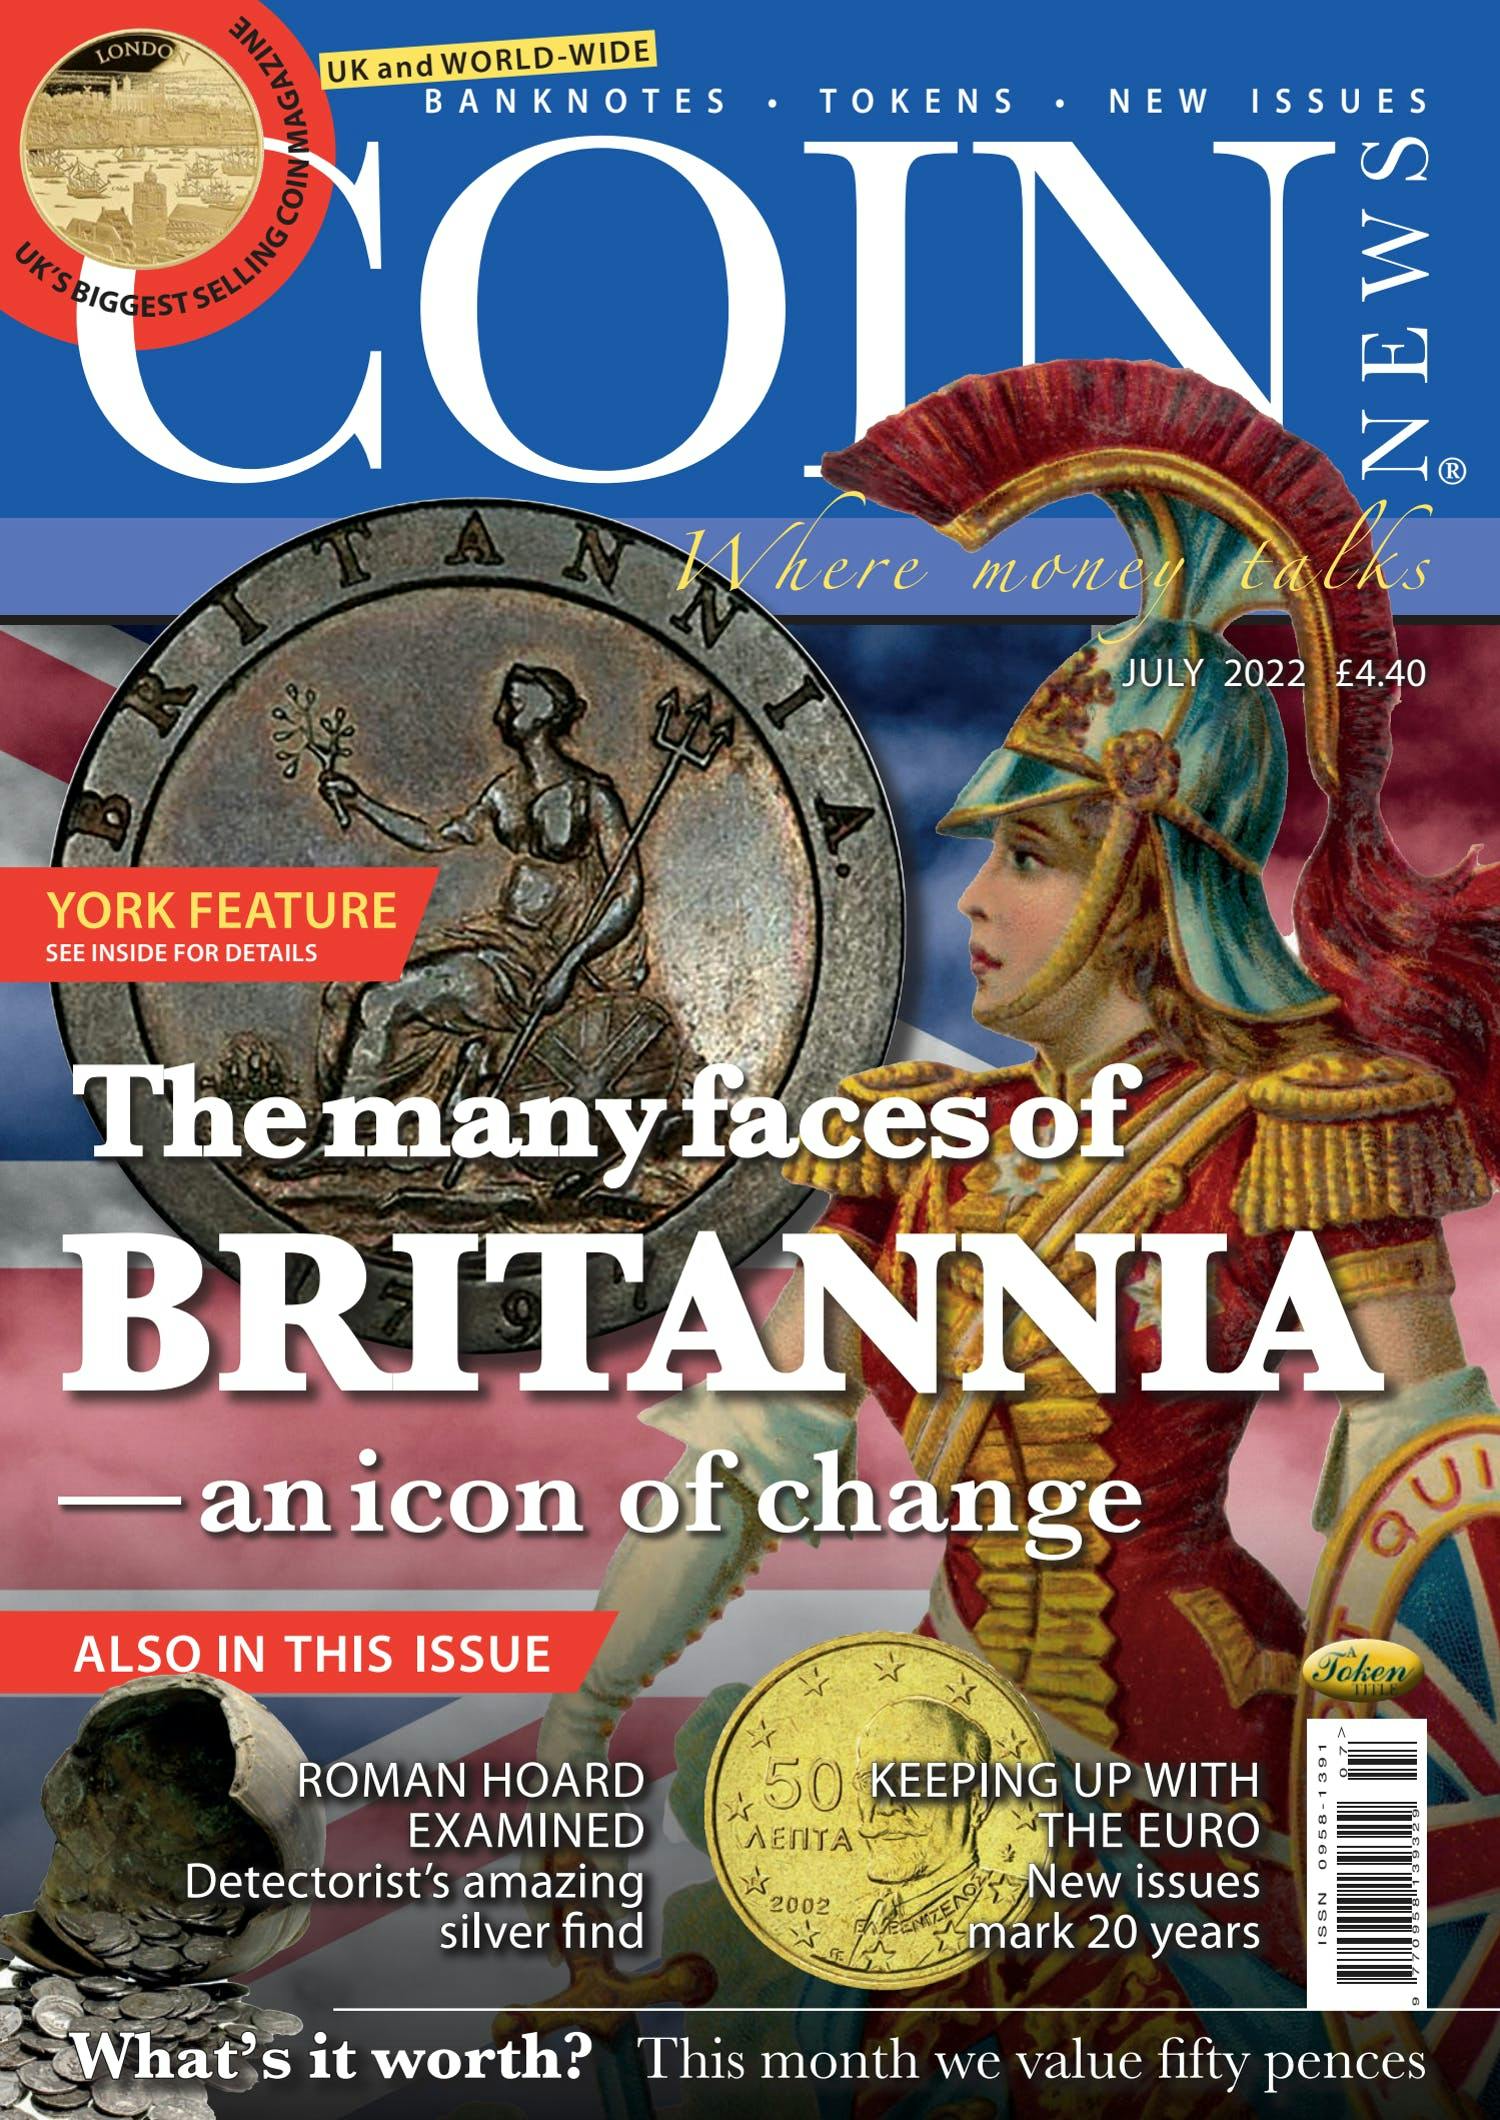 The front cover of Coin News, Volume 59, Number 7, July 2022